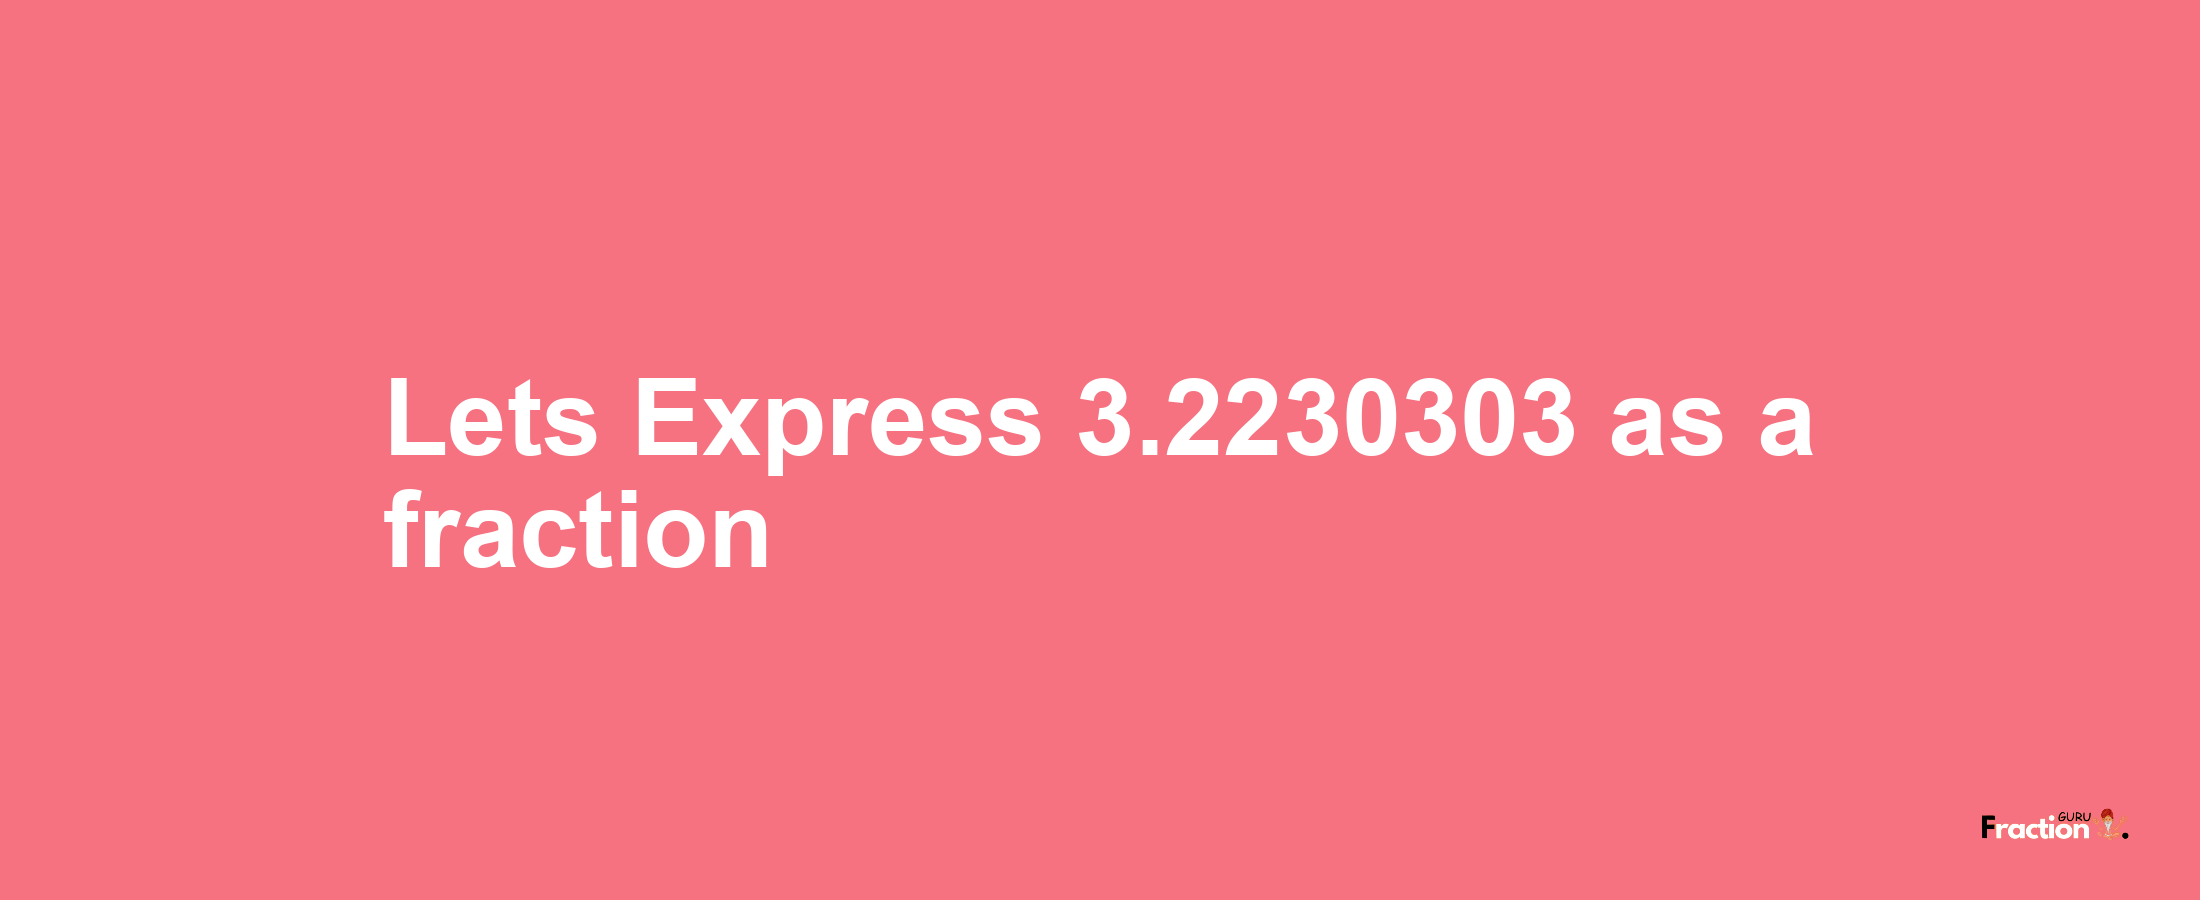 Lets Express 3.2230303 as afraction